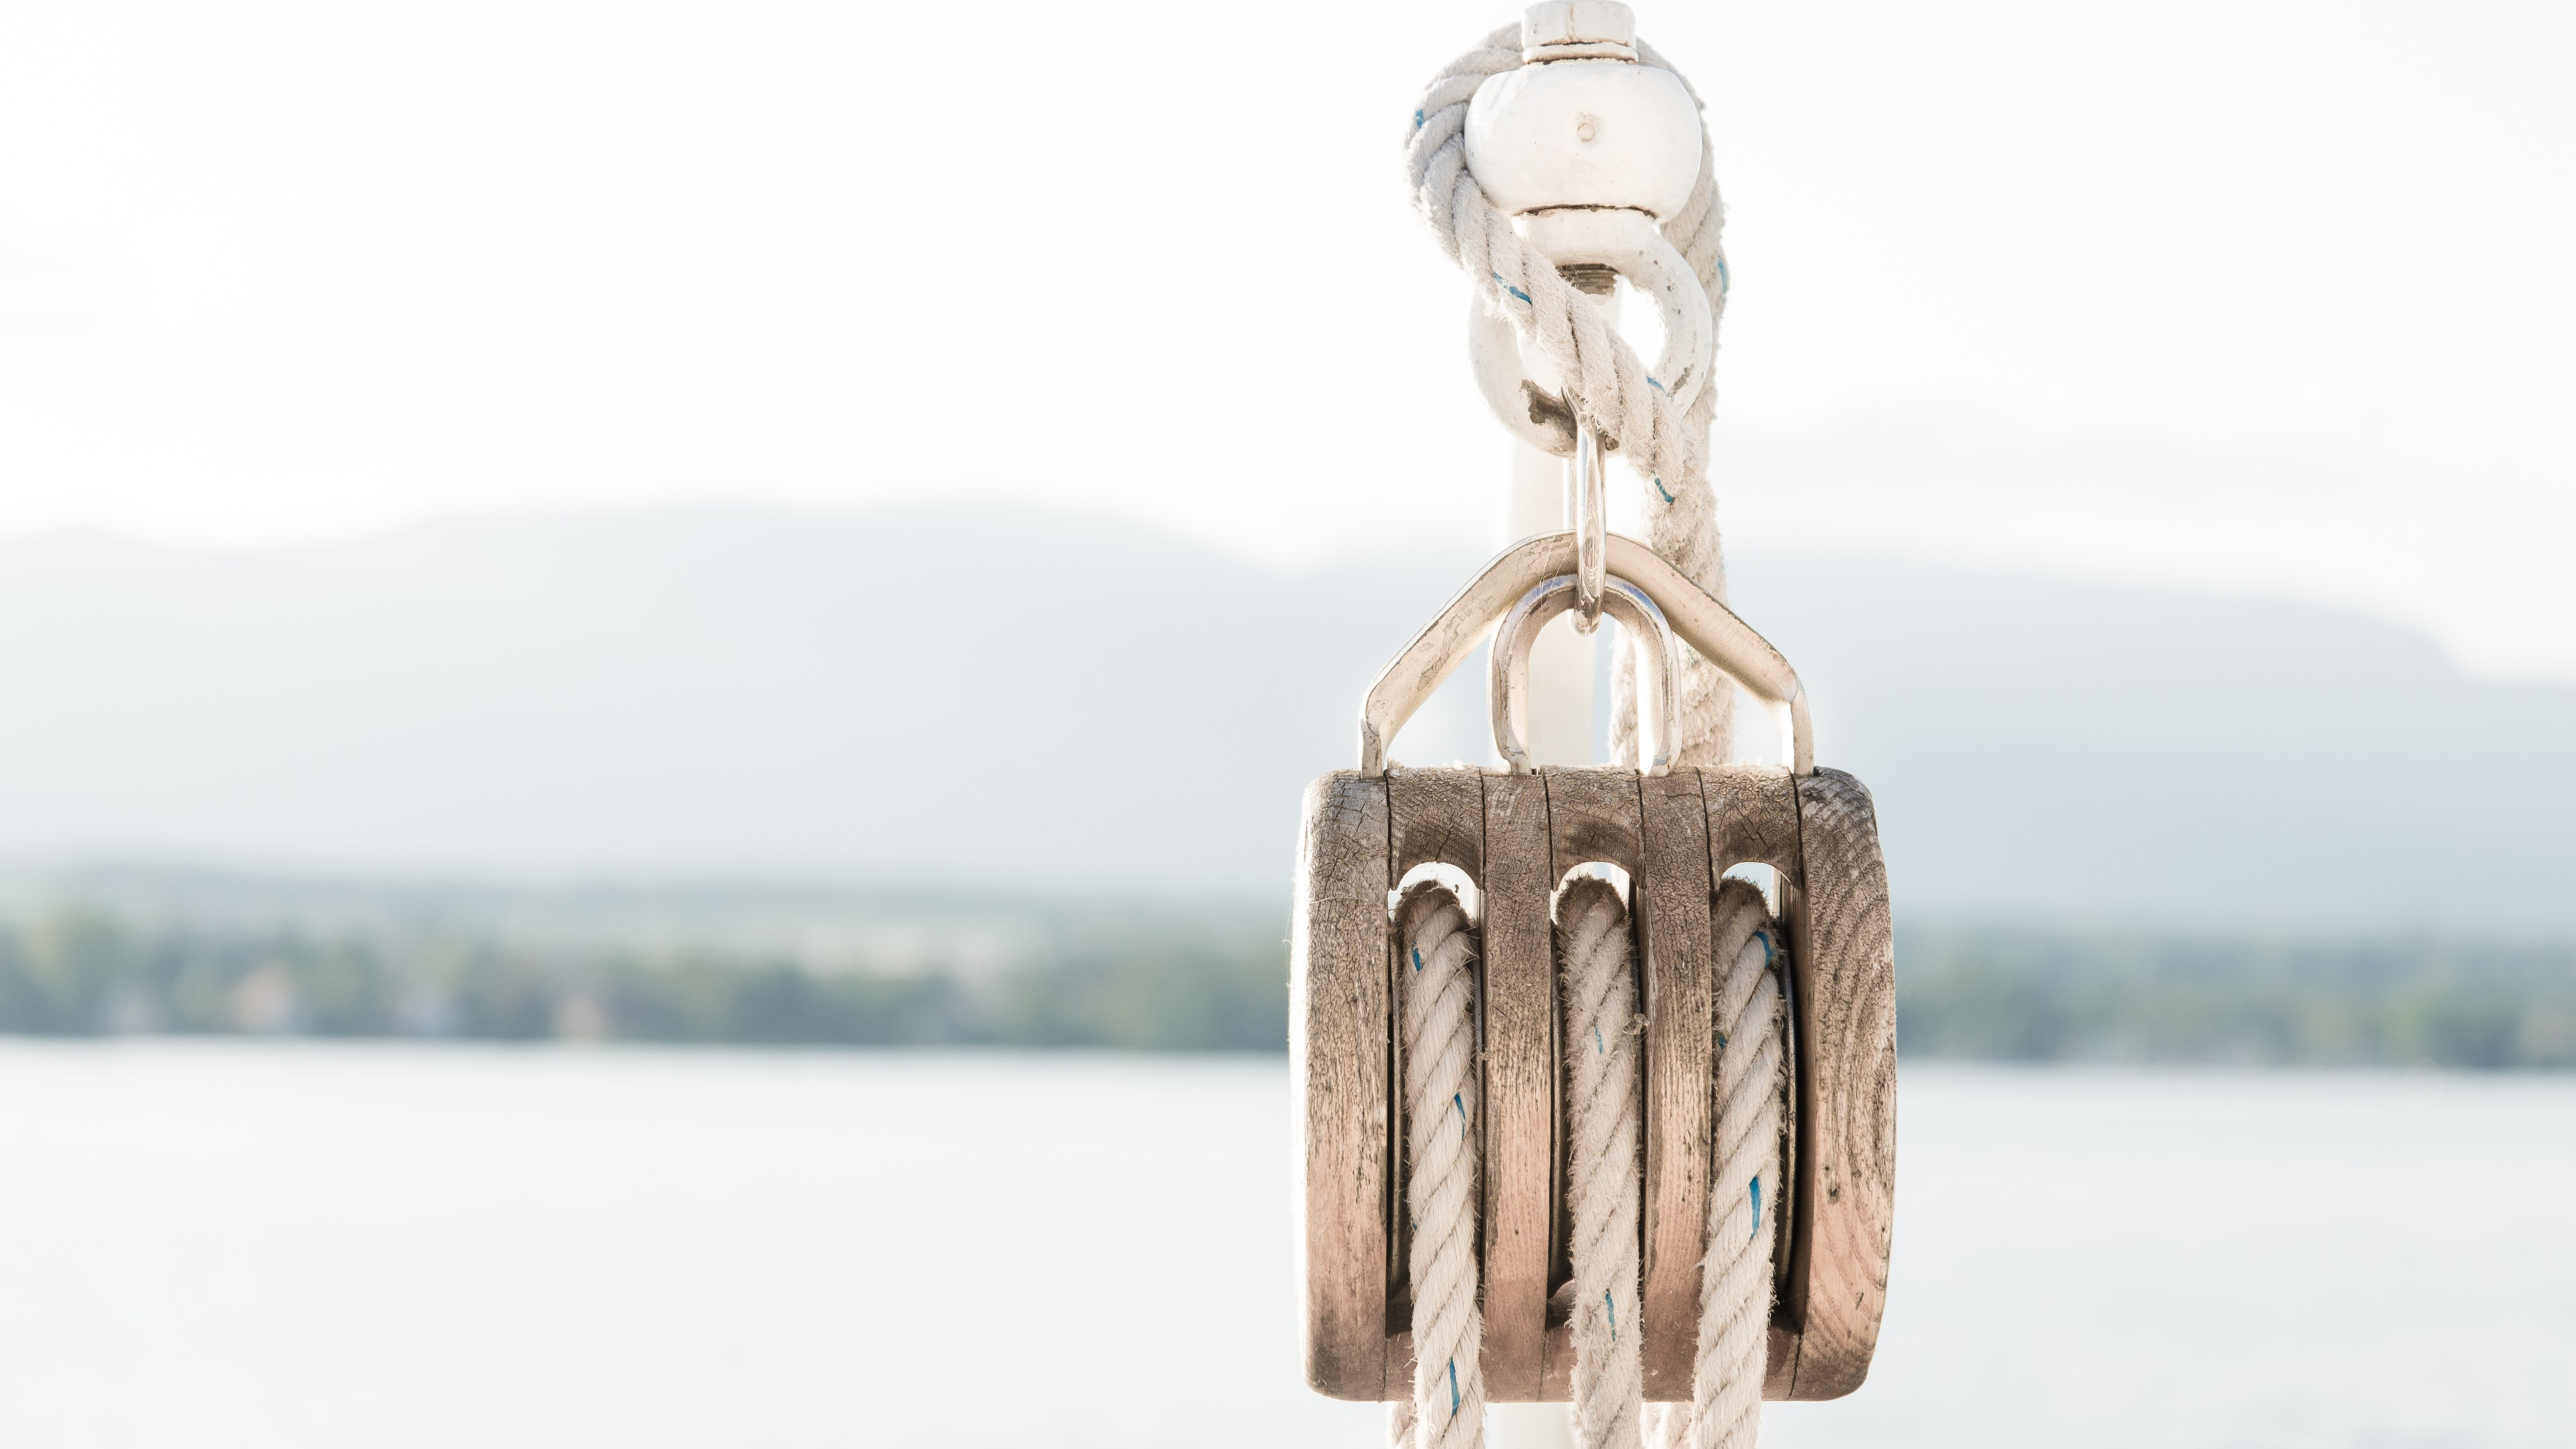 Pulley on a boat wallpaper 3840x2160